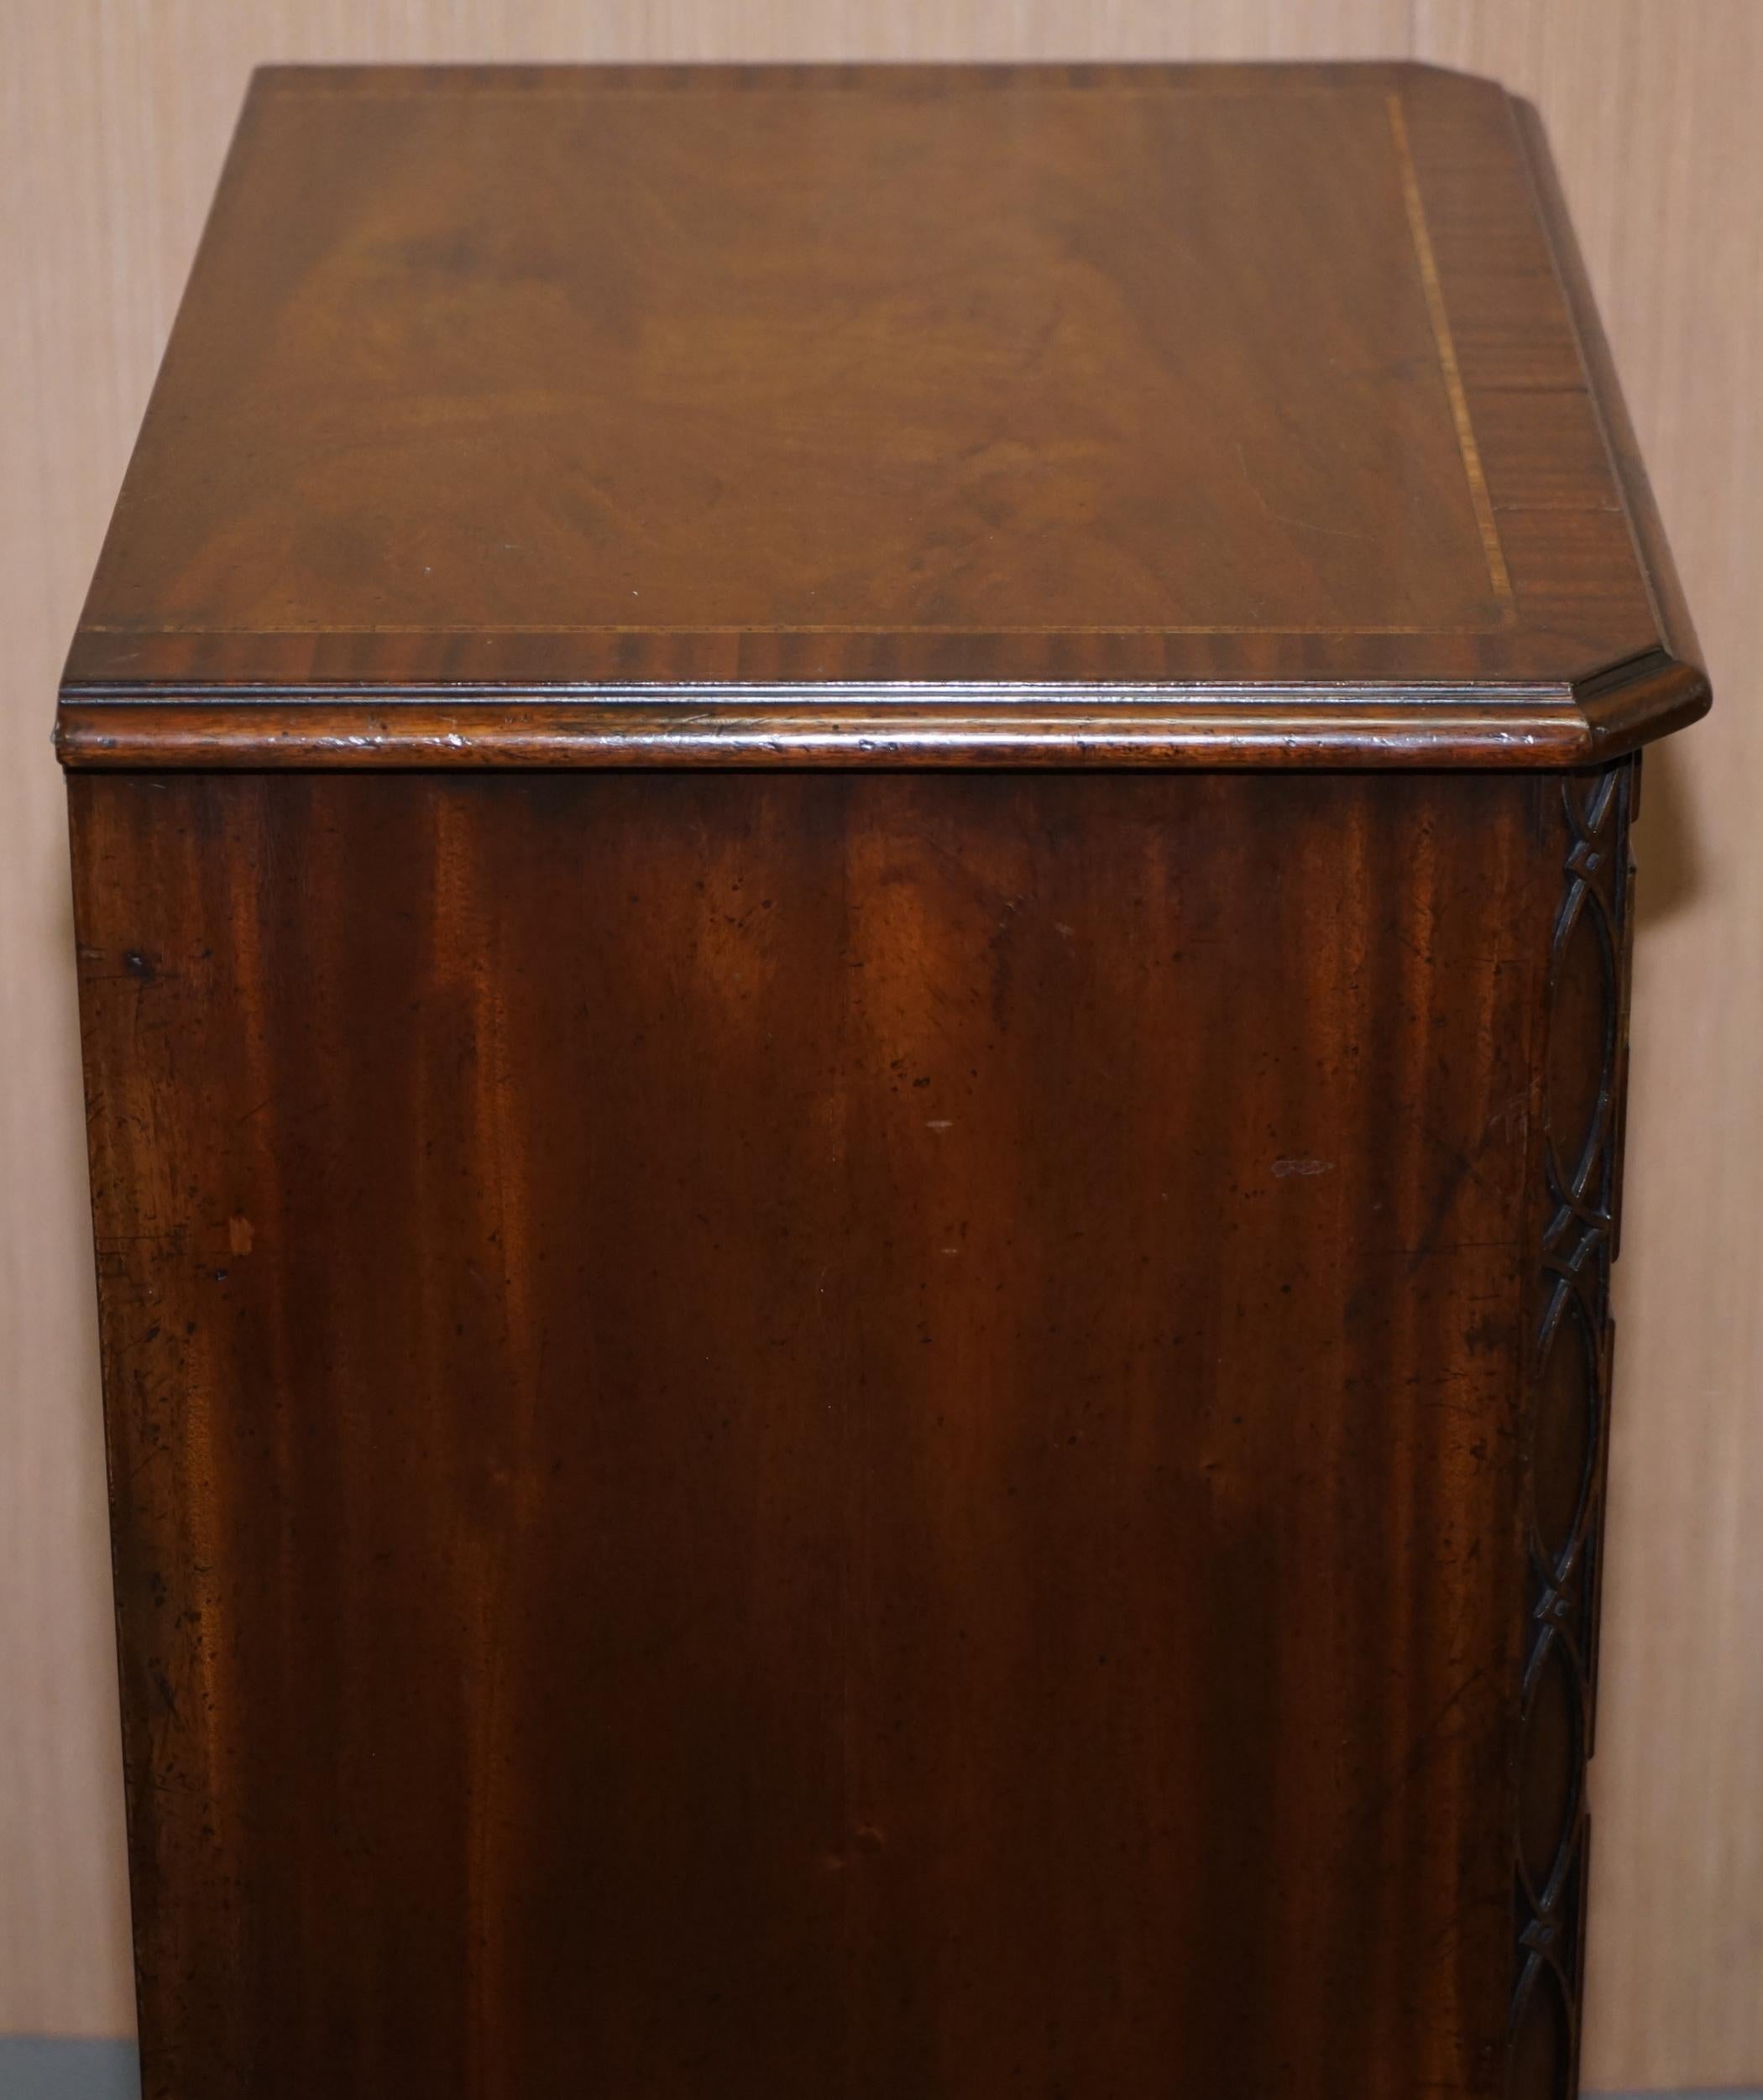 Stunning Record Player Cabinet Cupboard Hidden as Regency Chest of Drawers 4